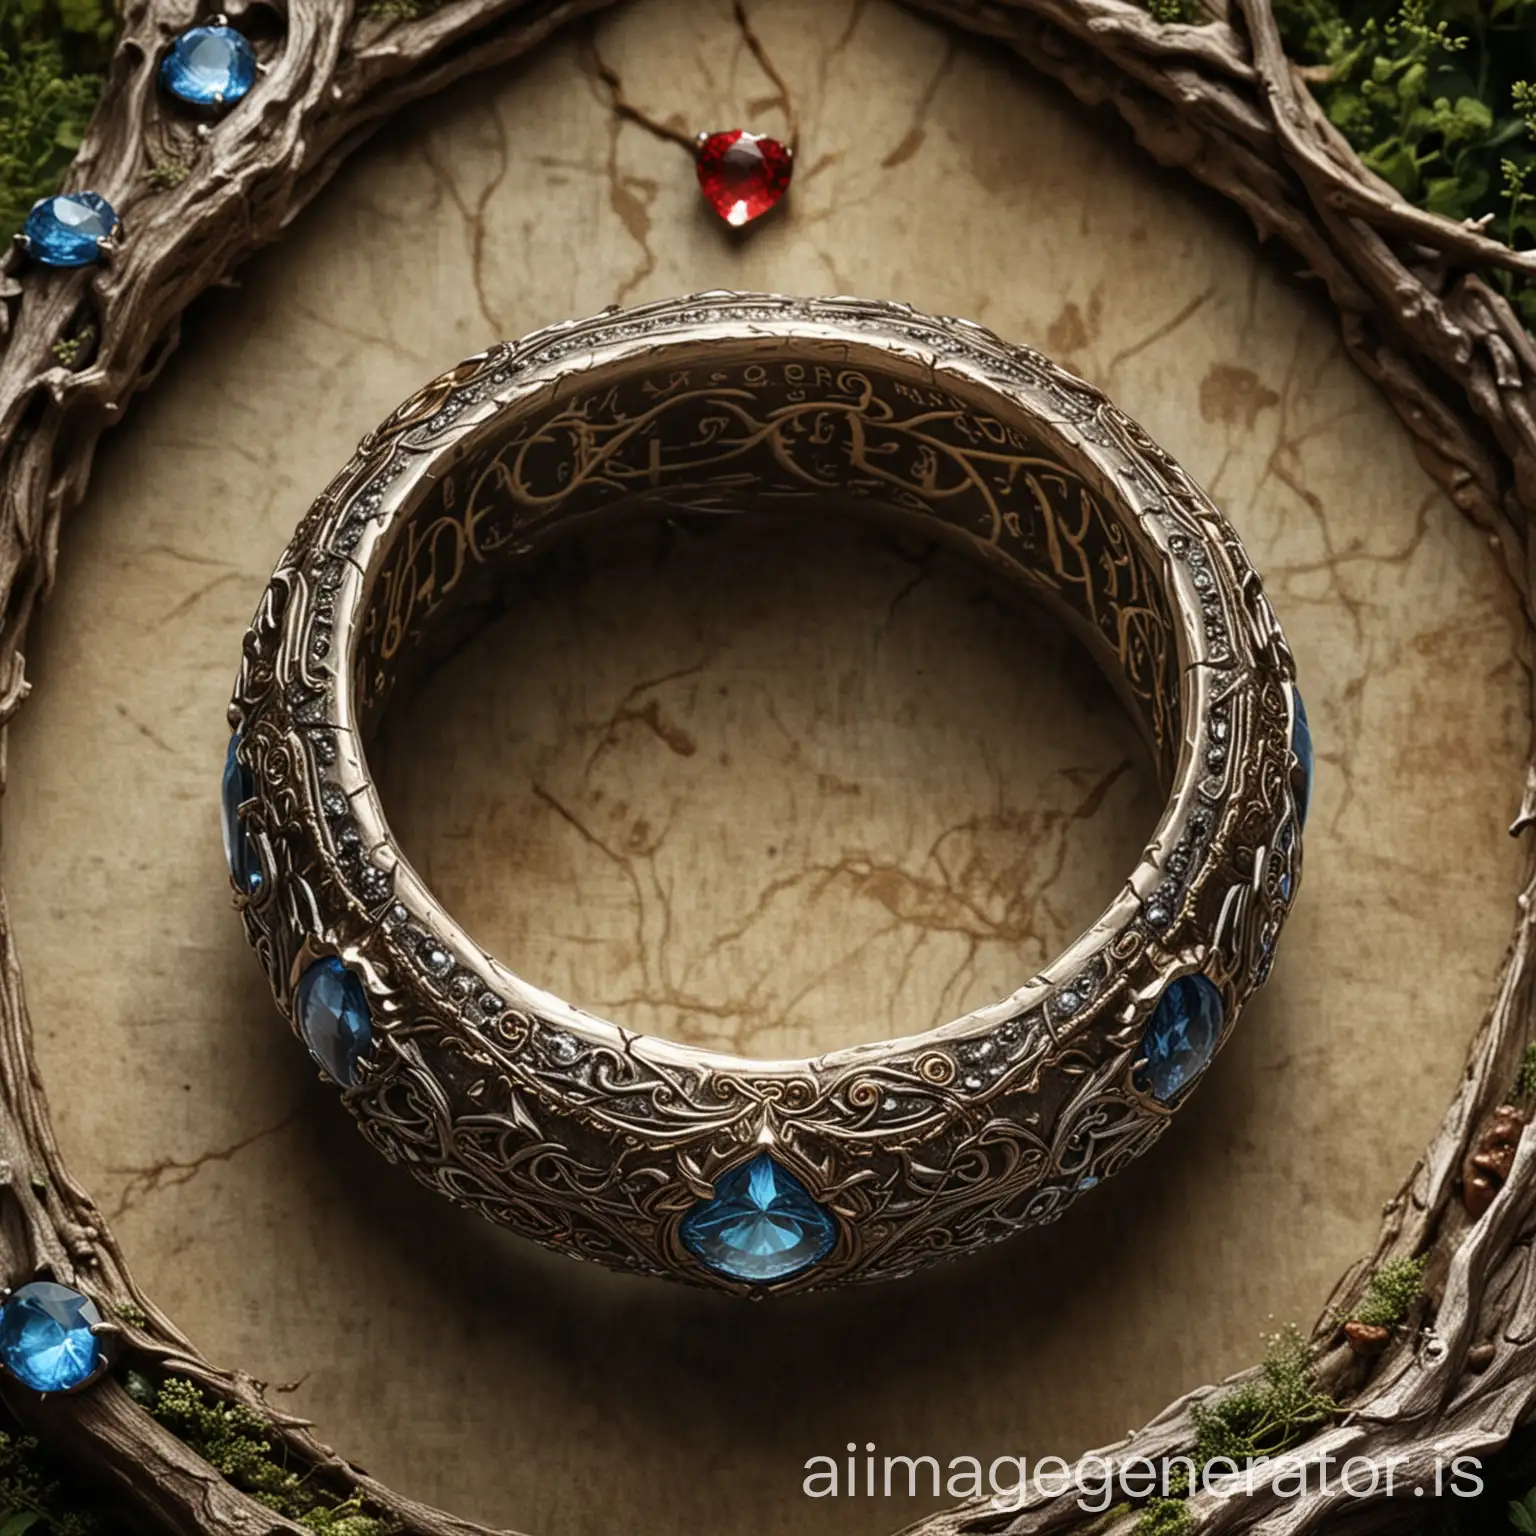 The story of the Lesser Rings finds its roots in the heart of Middle-Earth, amidst the formation of the Brotherhood of Master Jewel Smiths